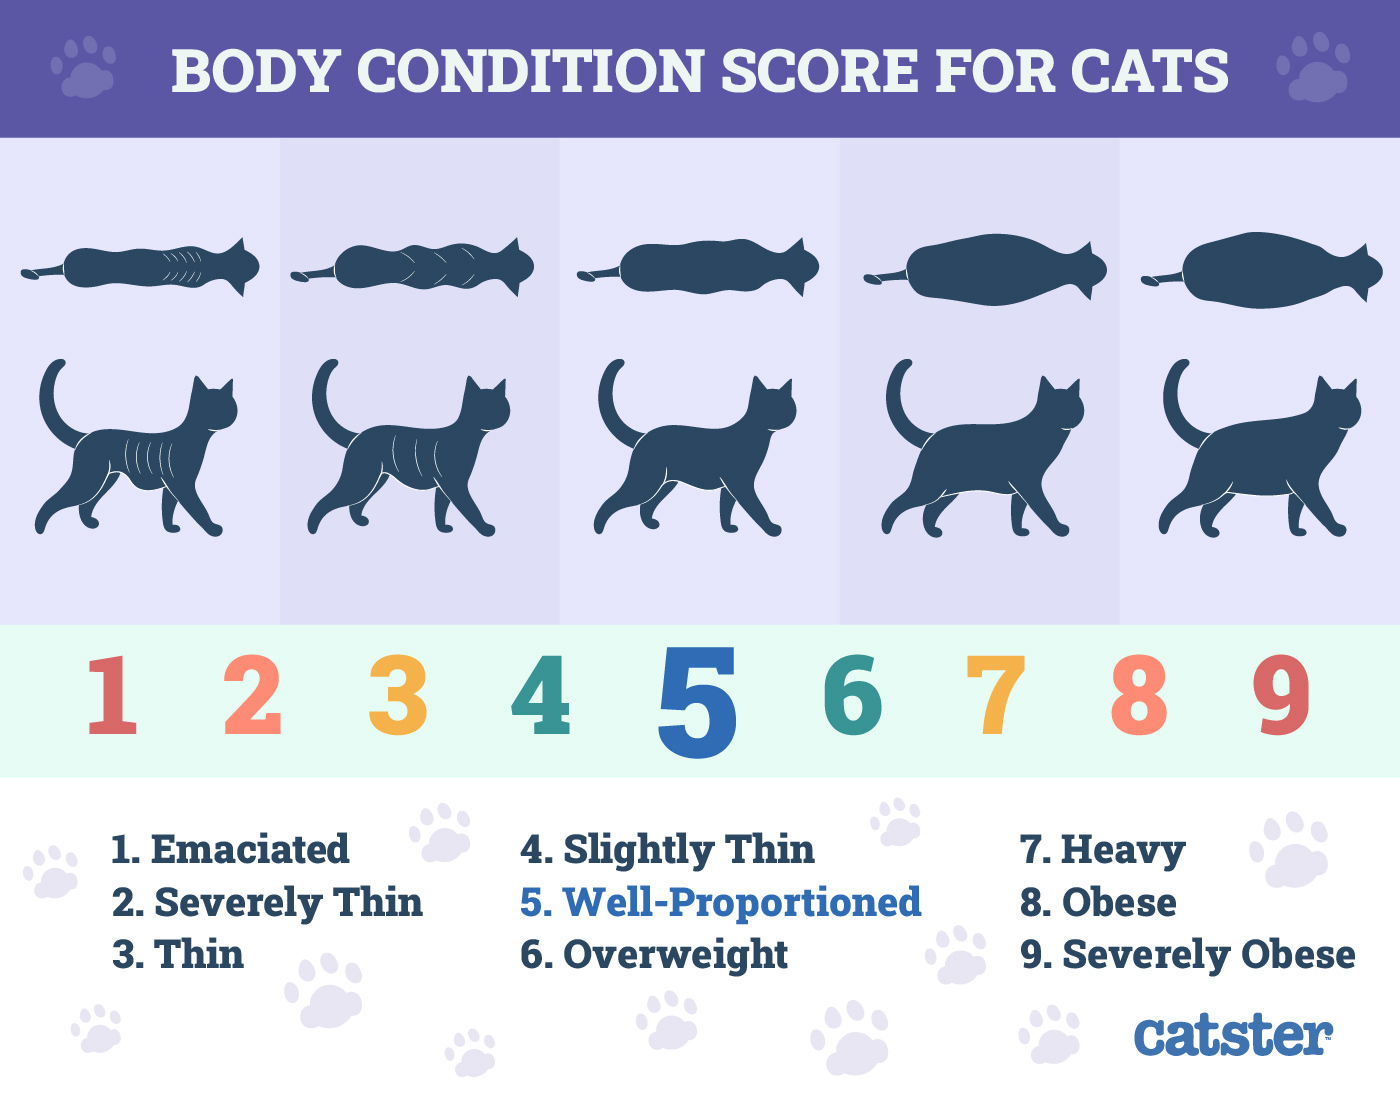 Cat Body Condition Score Healthy Weight